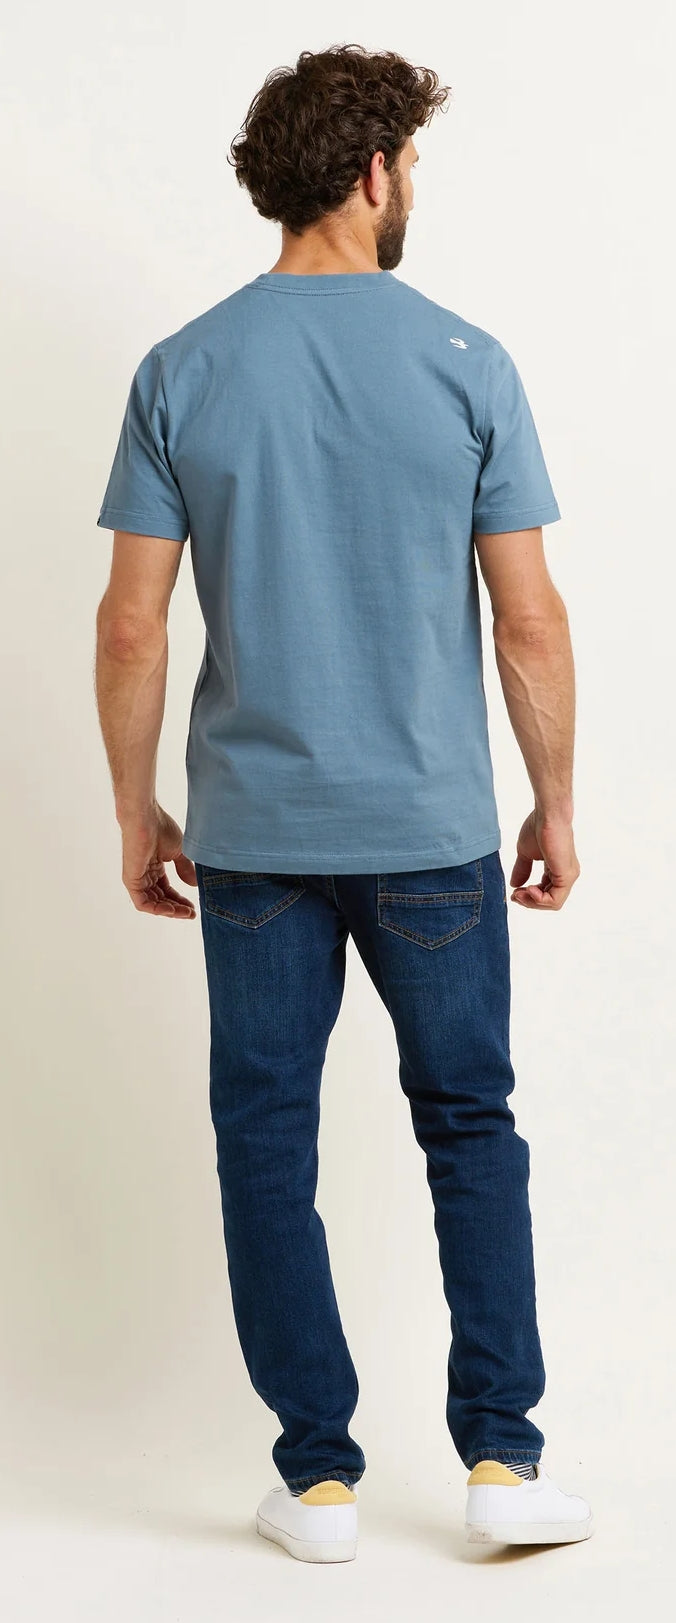 Brakeburn mens blue t-shirt with a white surf style print across the chest.